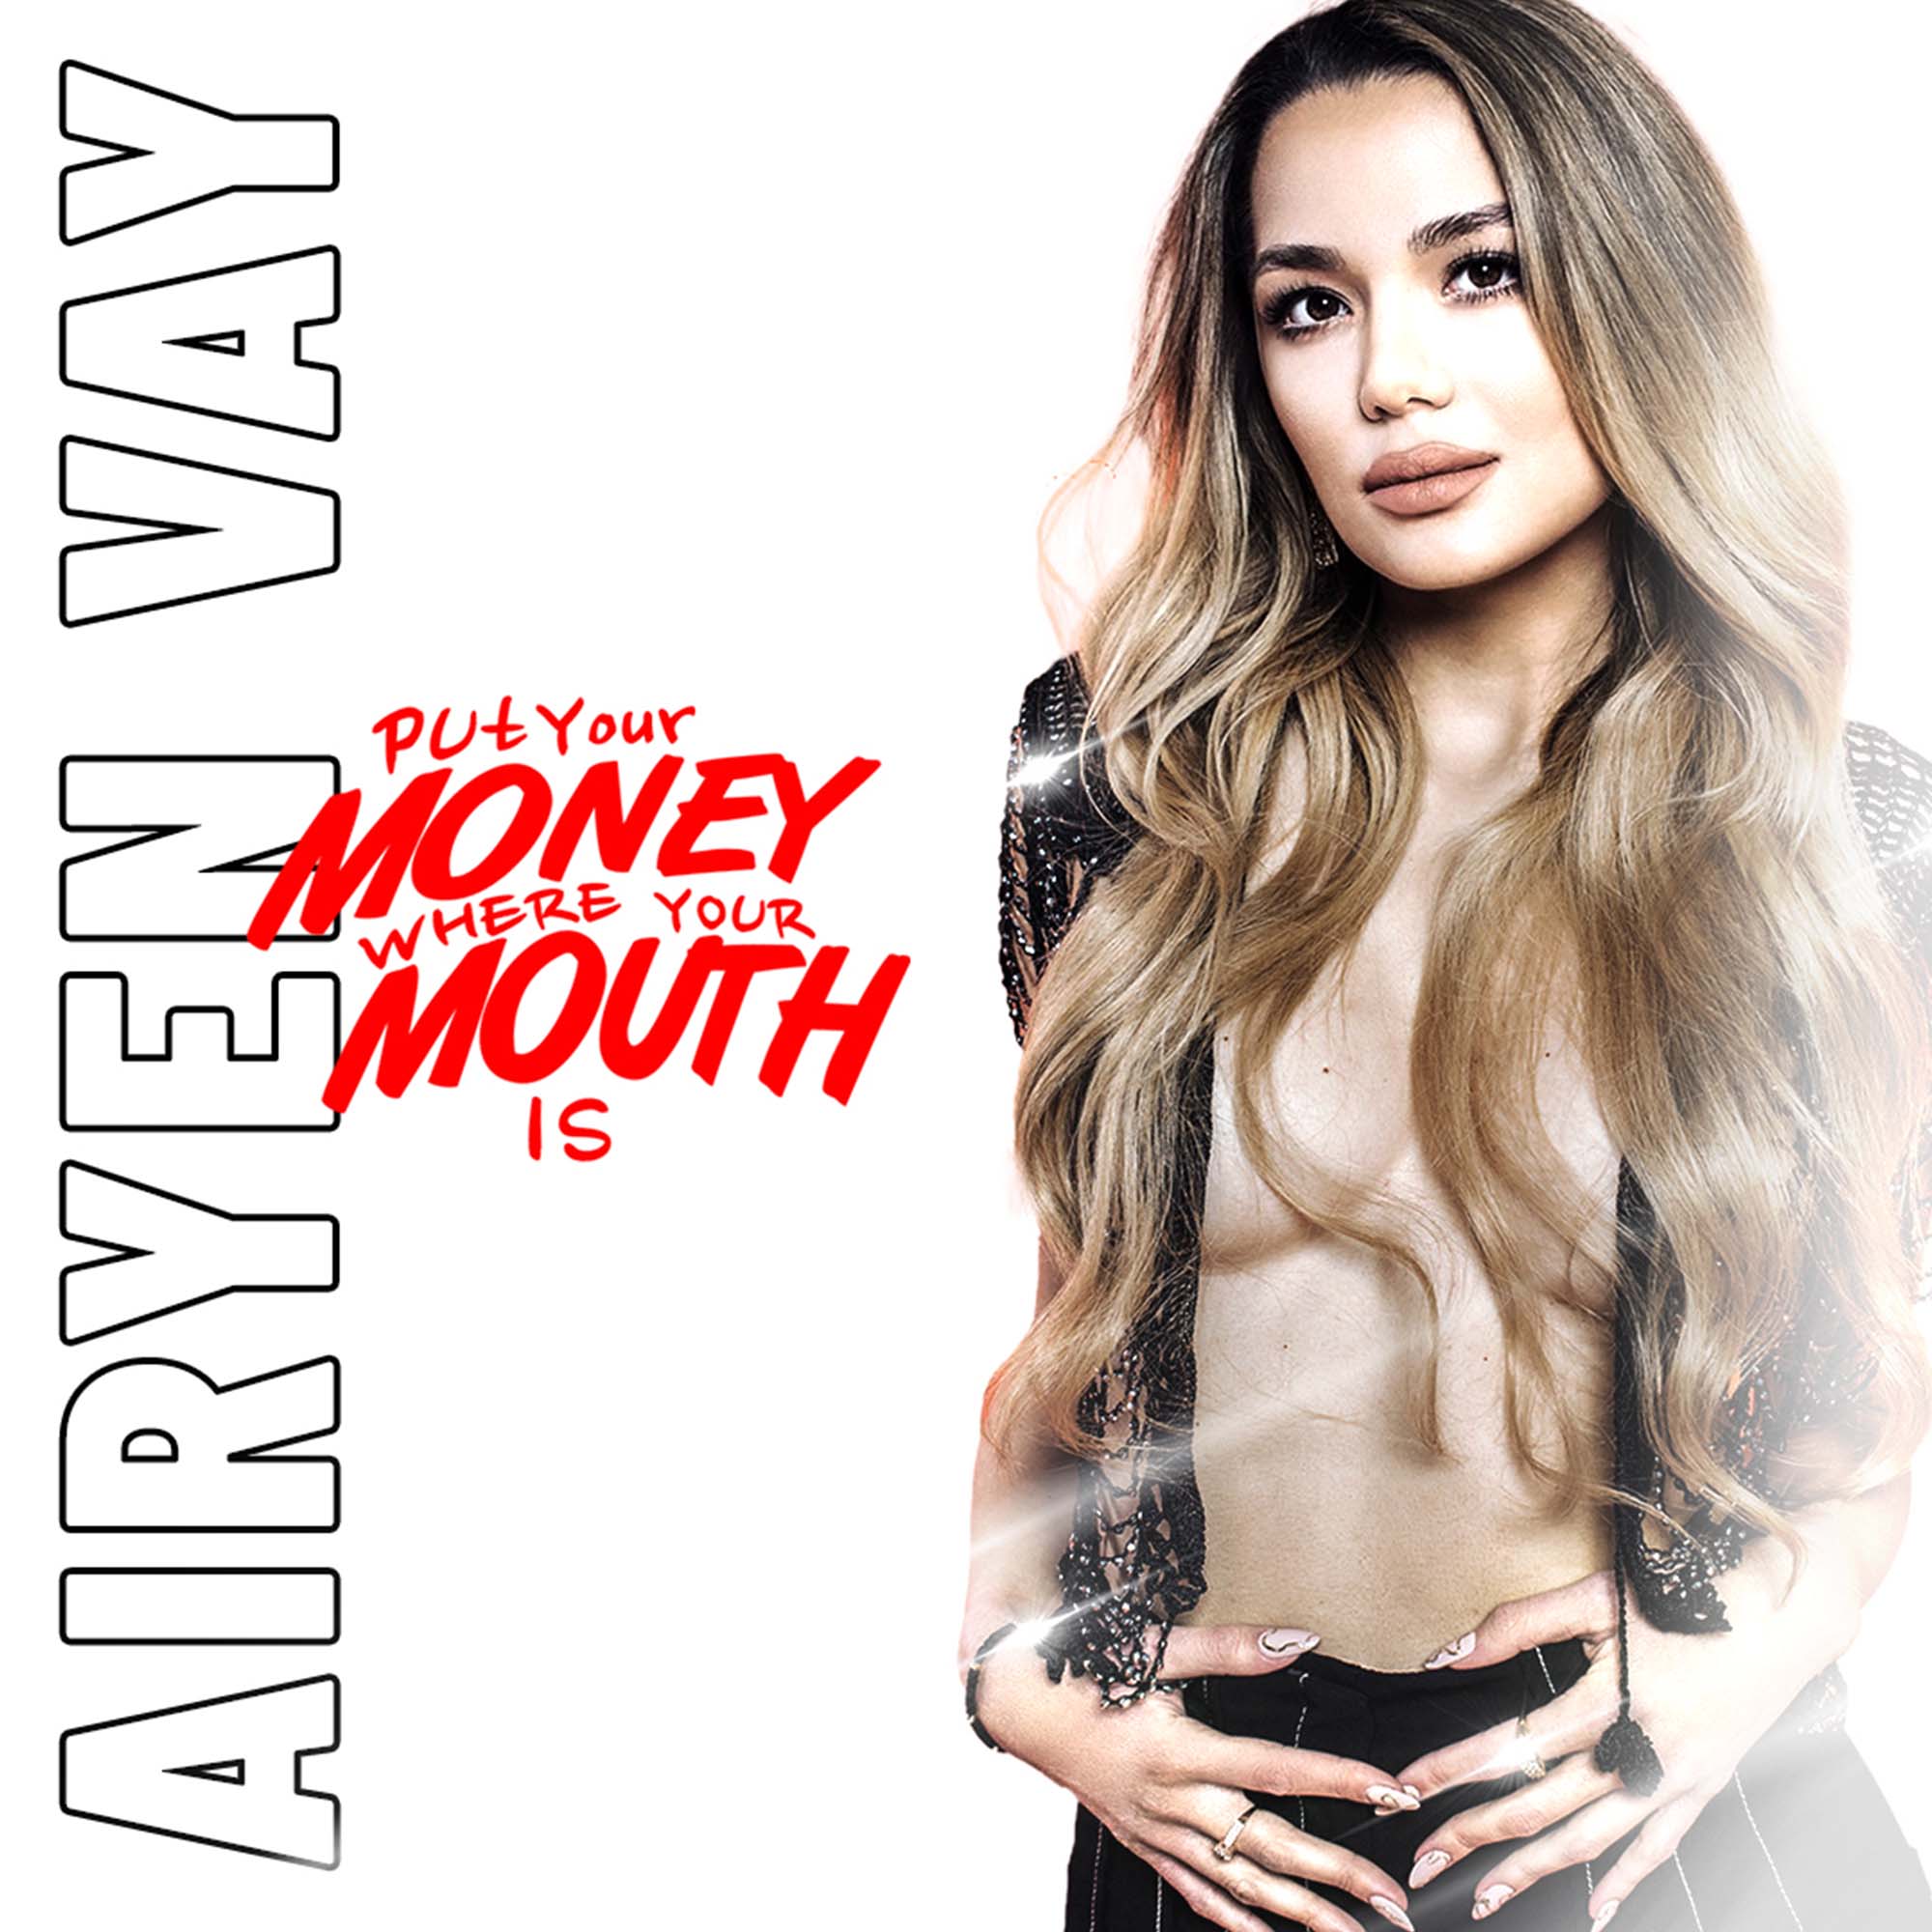 Airyen-vay-put-your-money-where-your-mouth